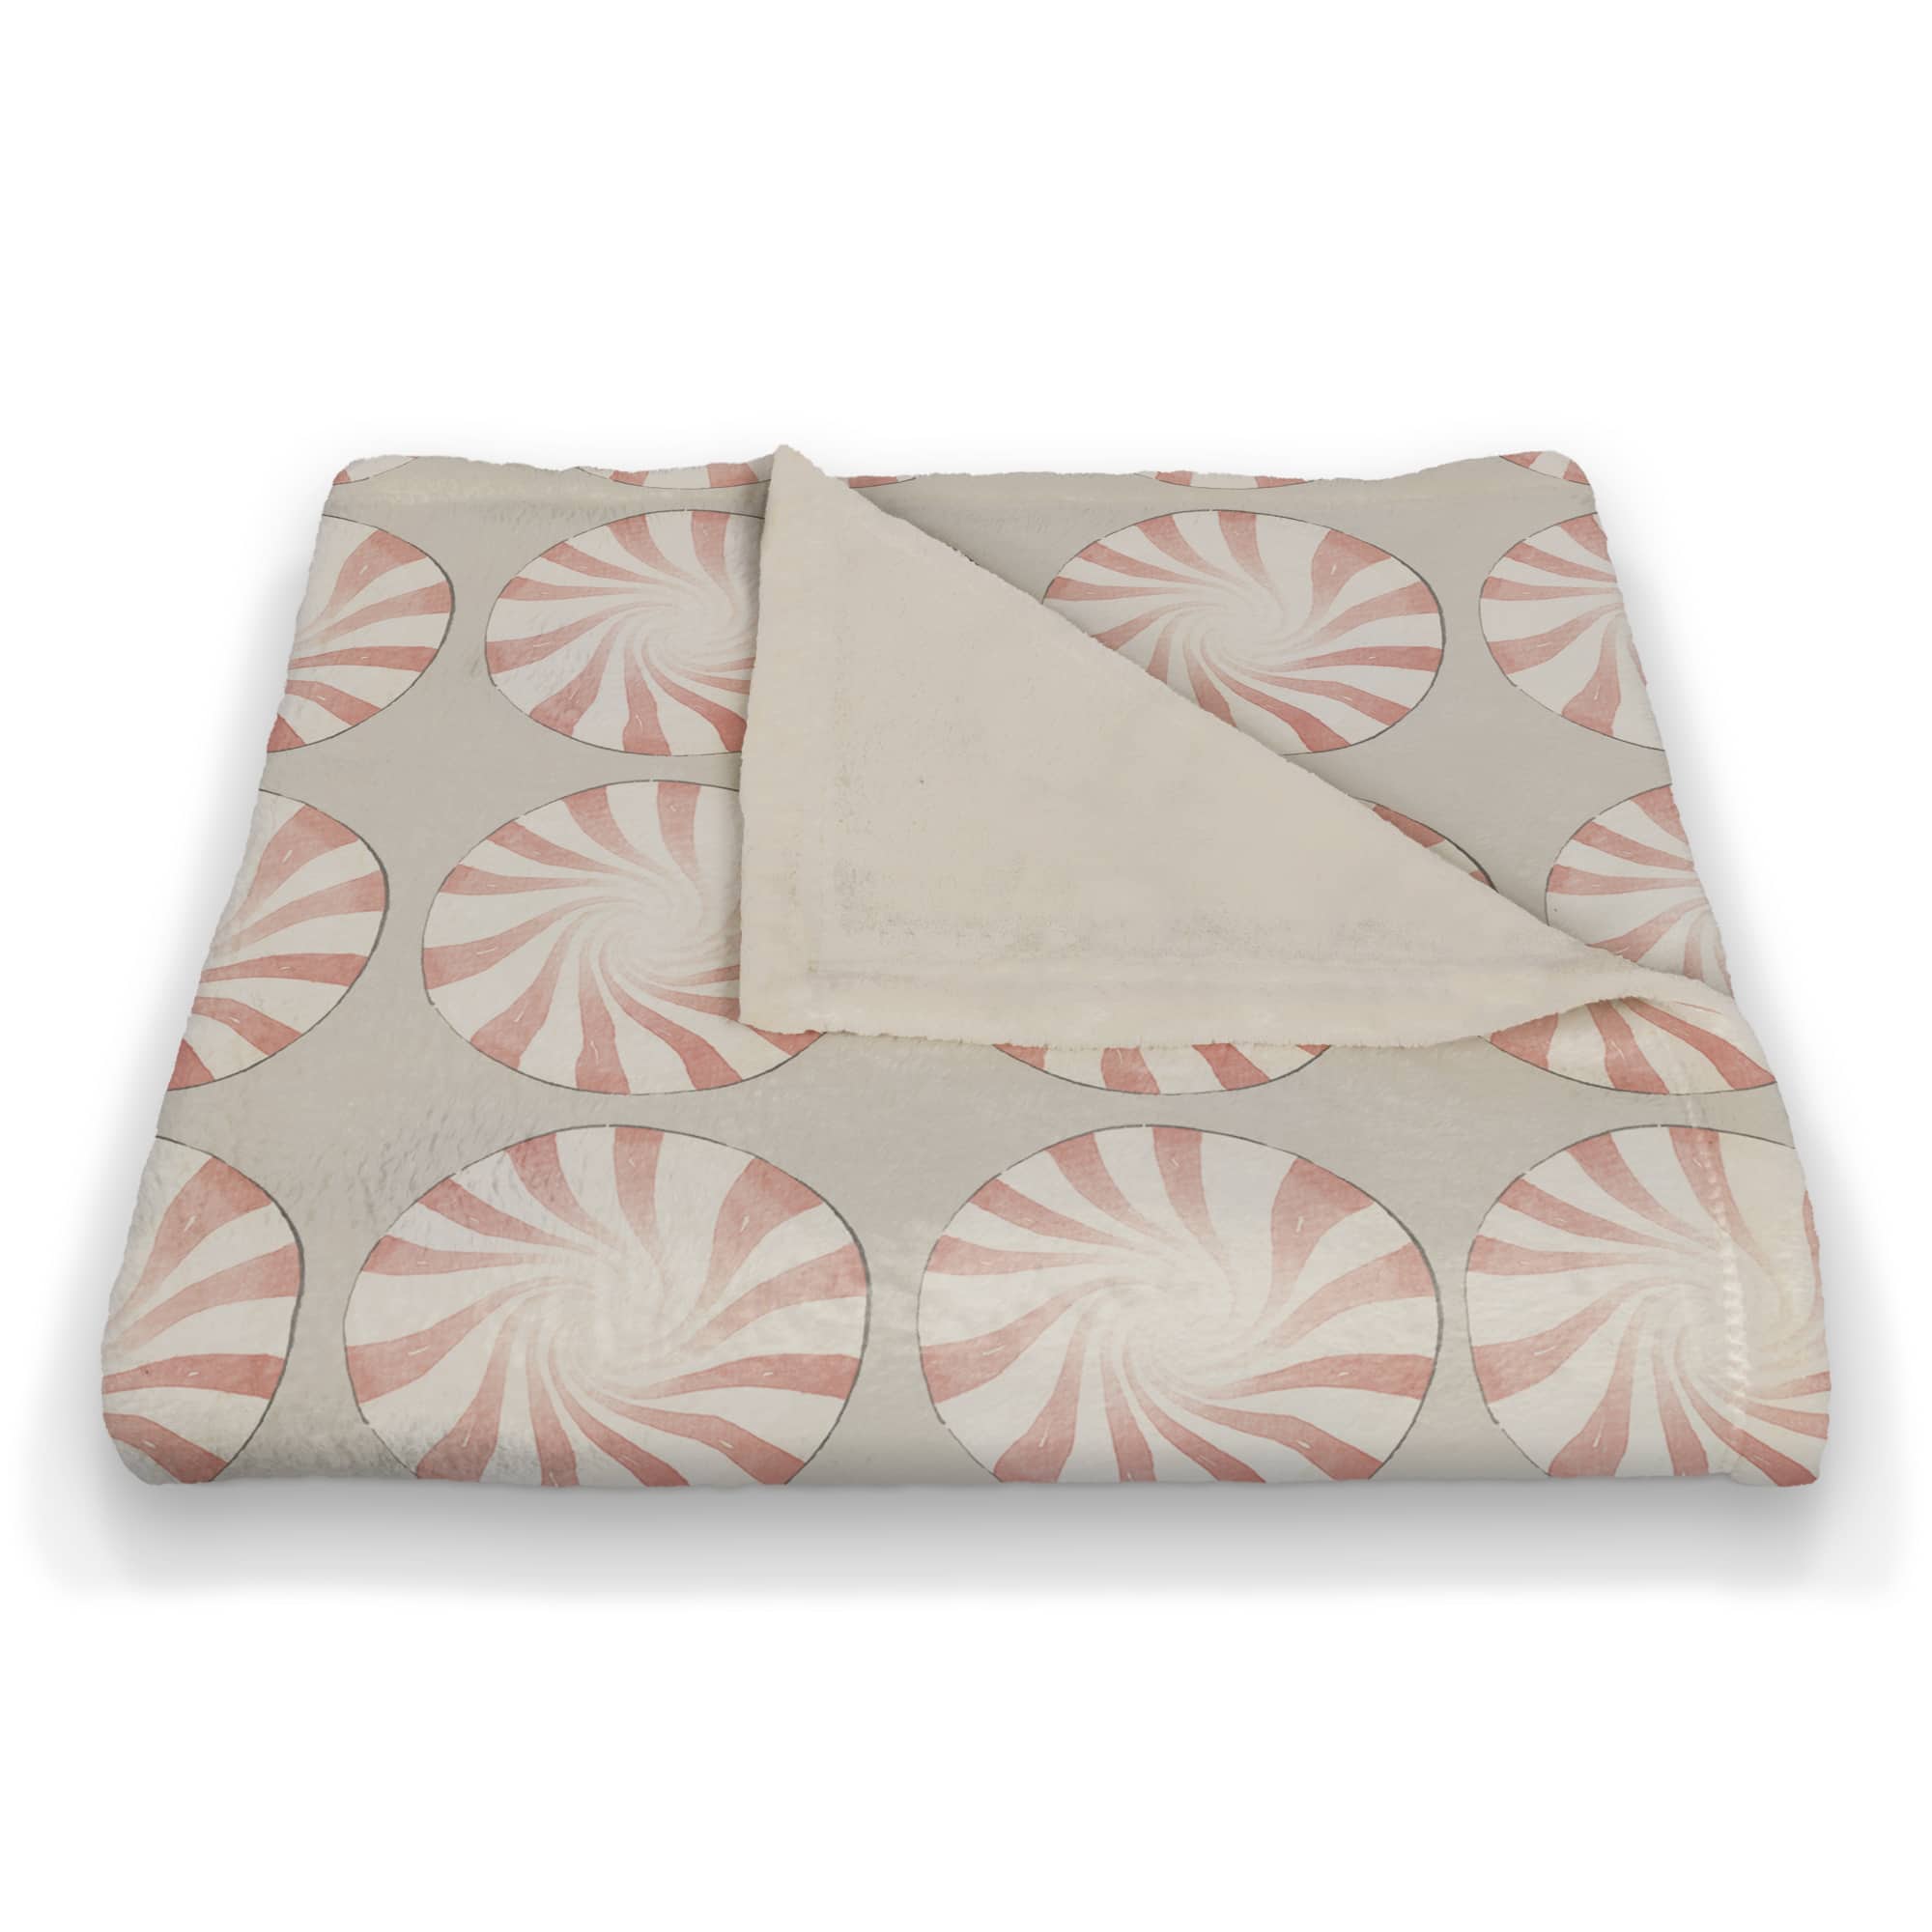 Peppermint Candy 50x60 Coral Fleece Blanket